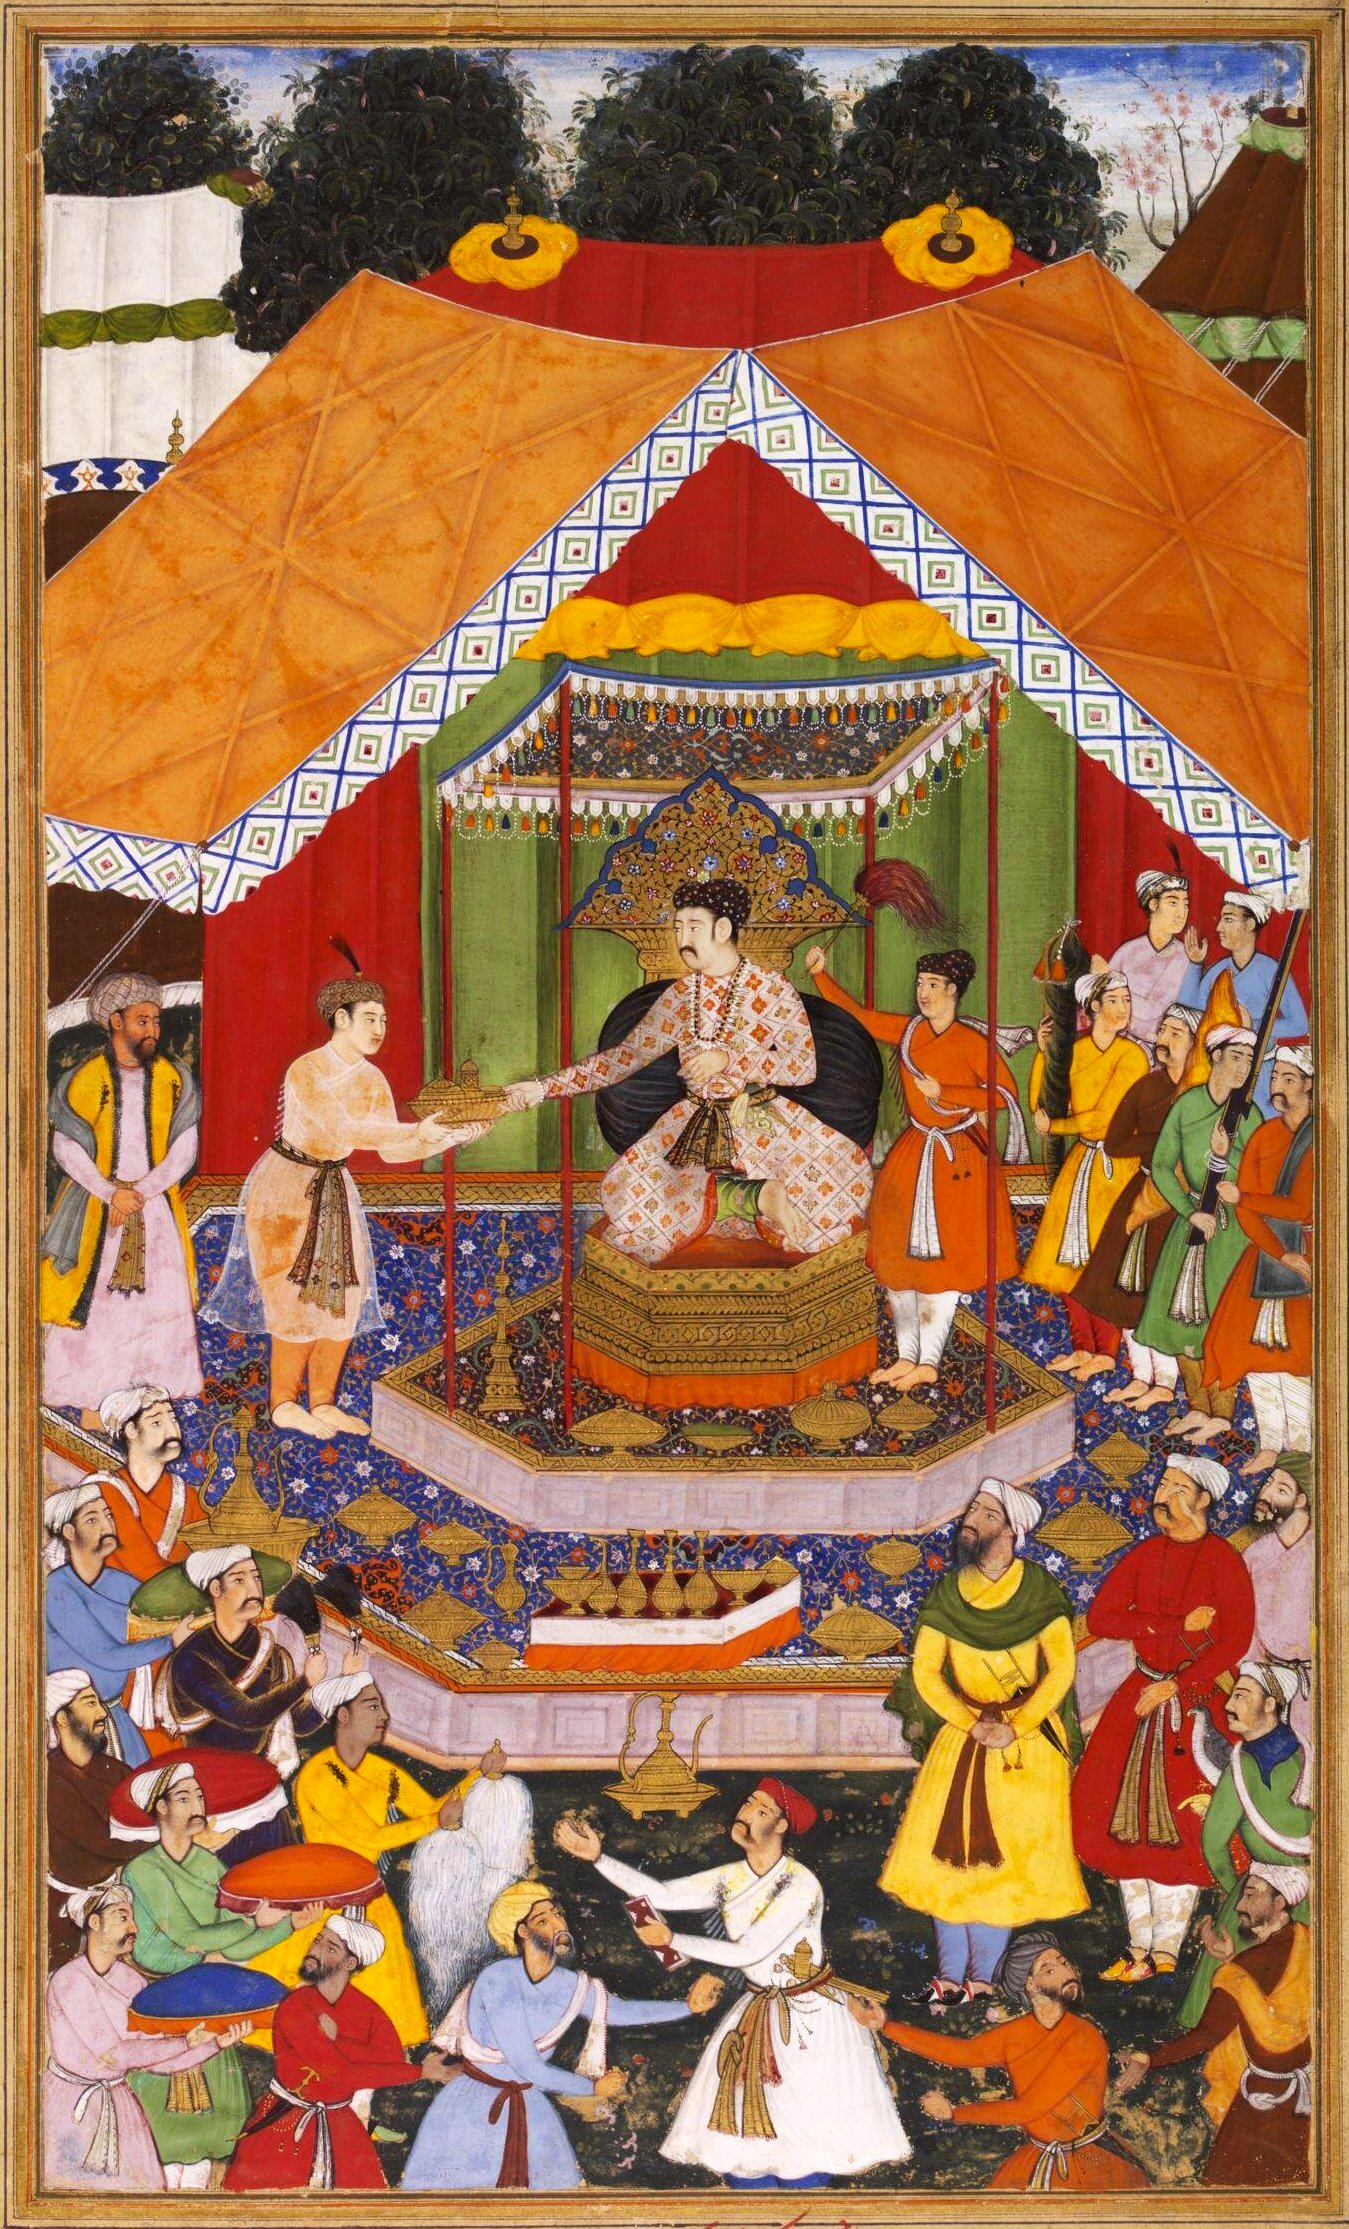 Inside a tent, Akbar sits regally on a throne as his foster brother, Azim Khan, entertains him.